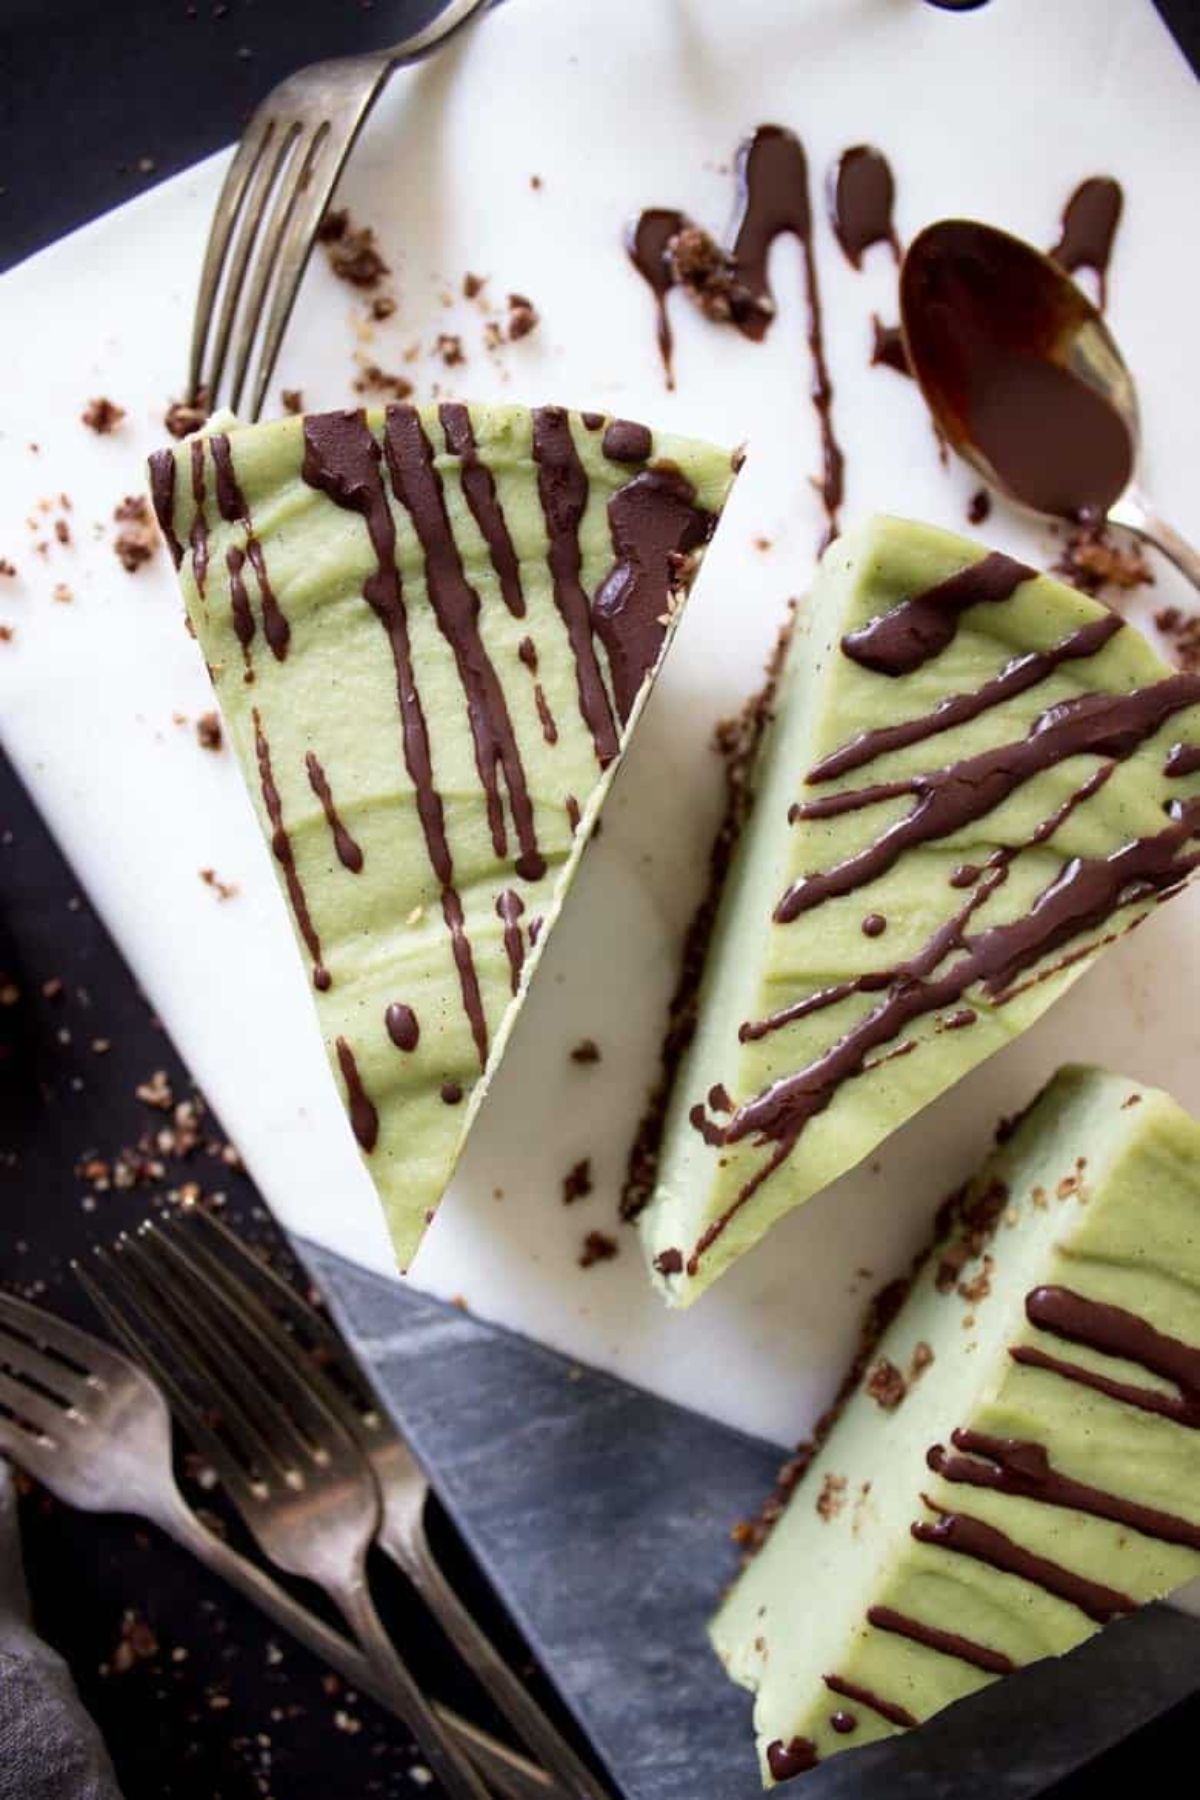 A tile with 3 slices of light green colored cheesecake slices drizzled with chocolate sauce